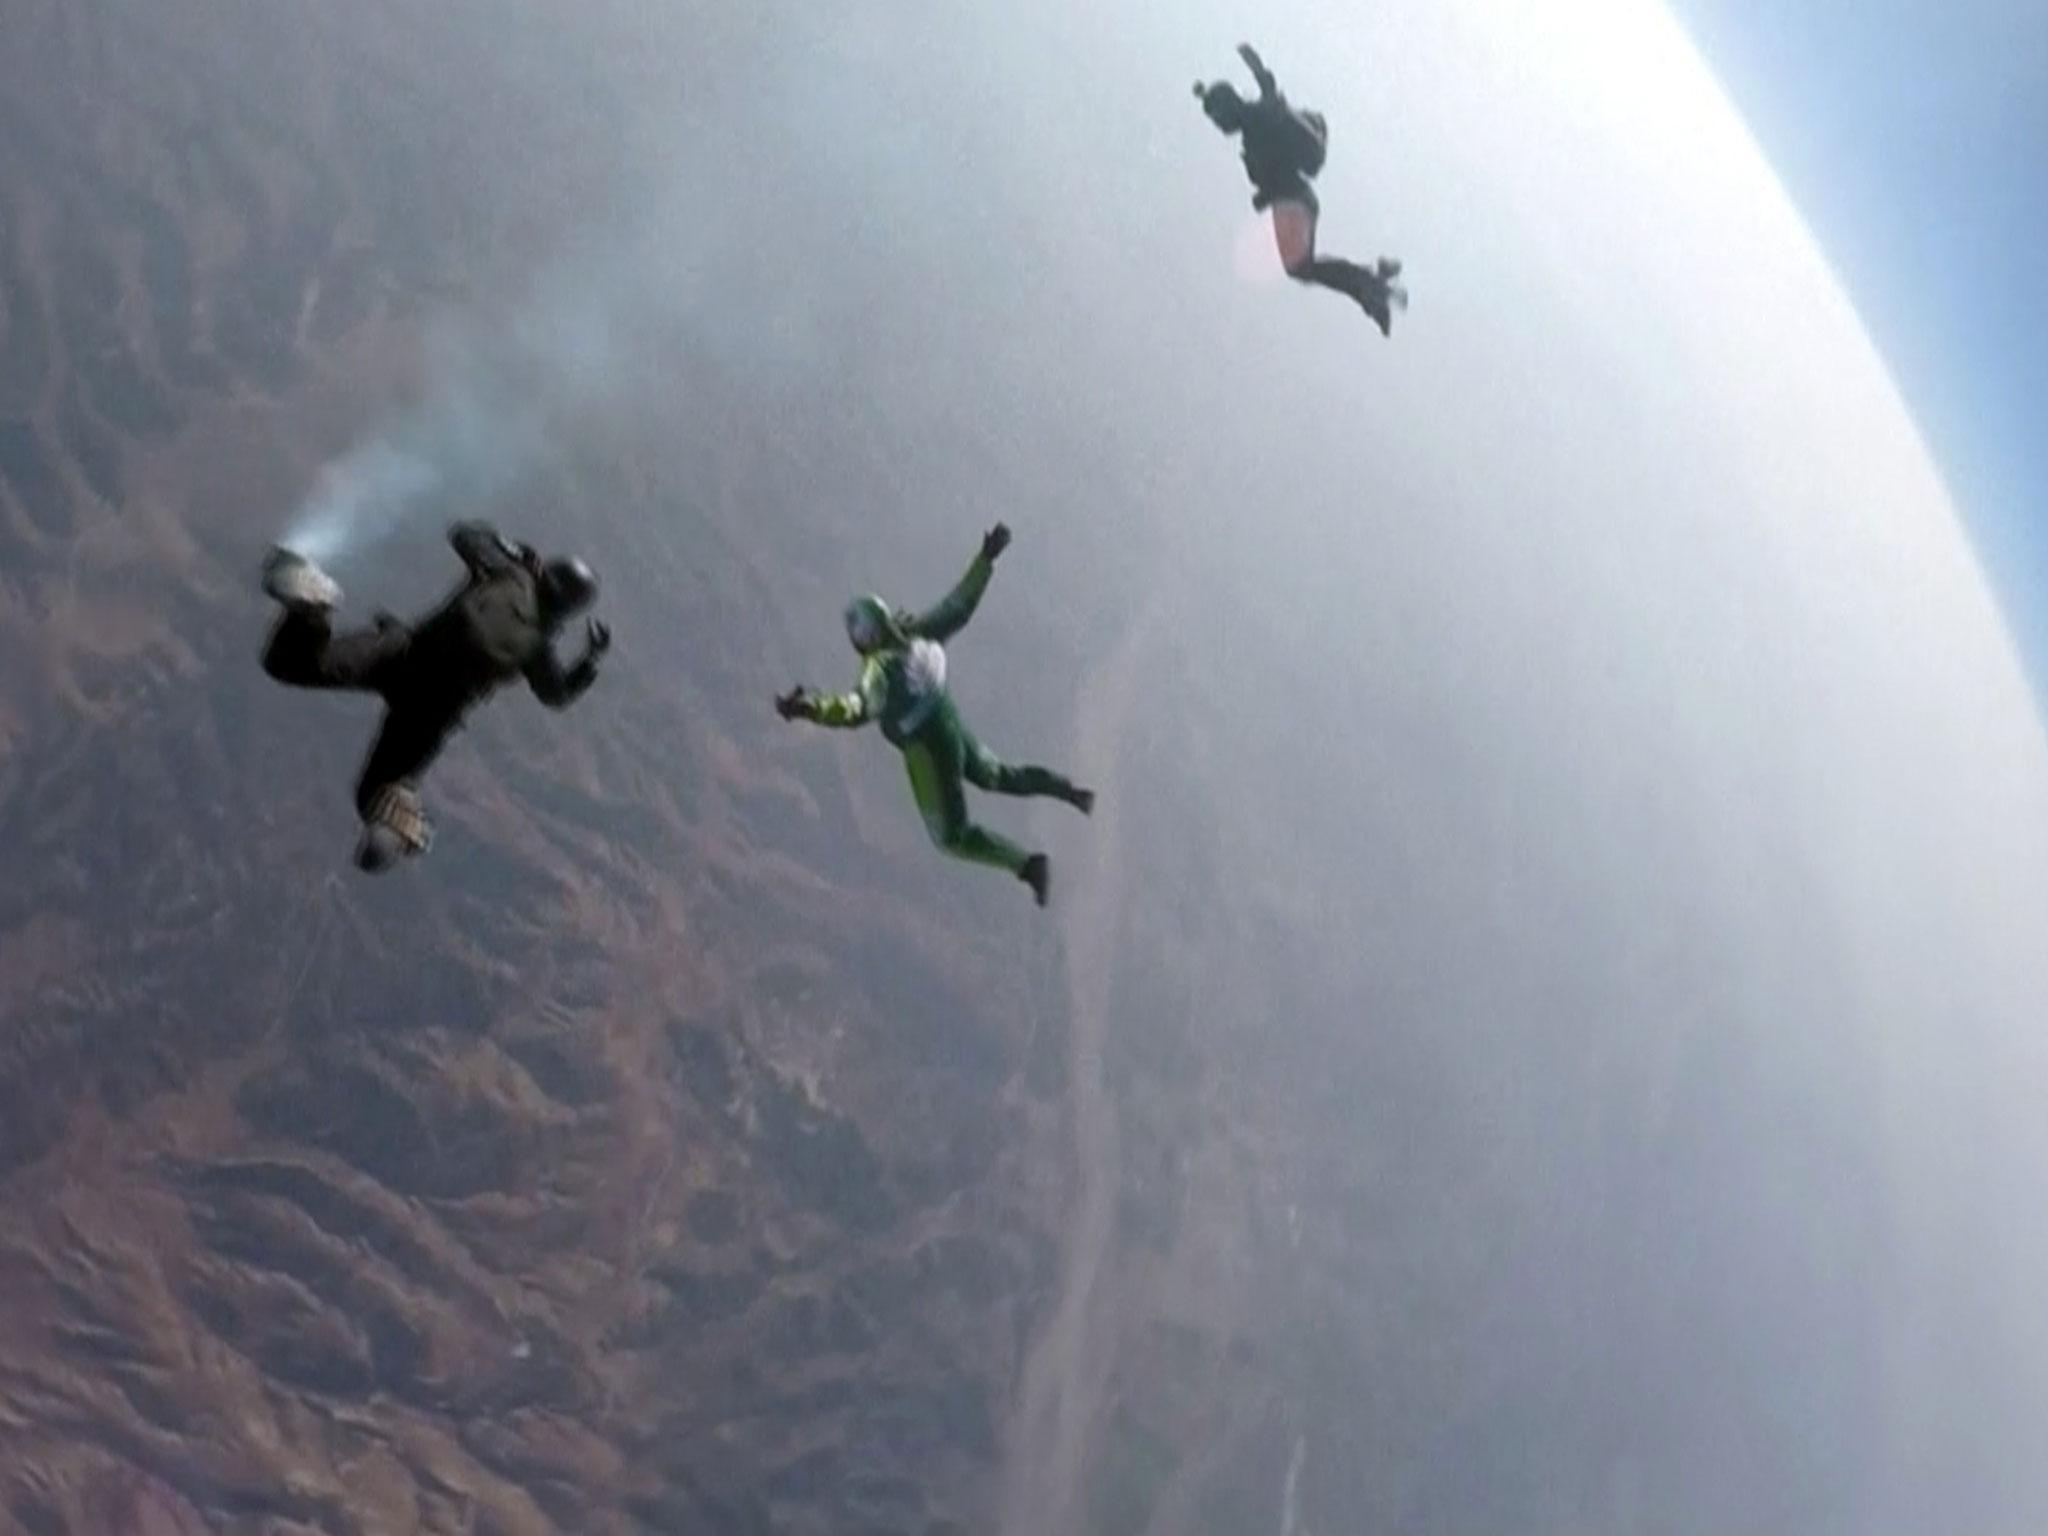 Skydiver jumps from 25,000 feet with no parachute in world first ...